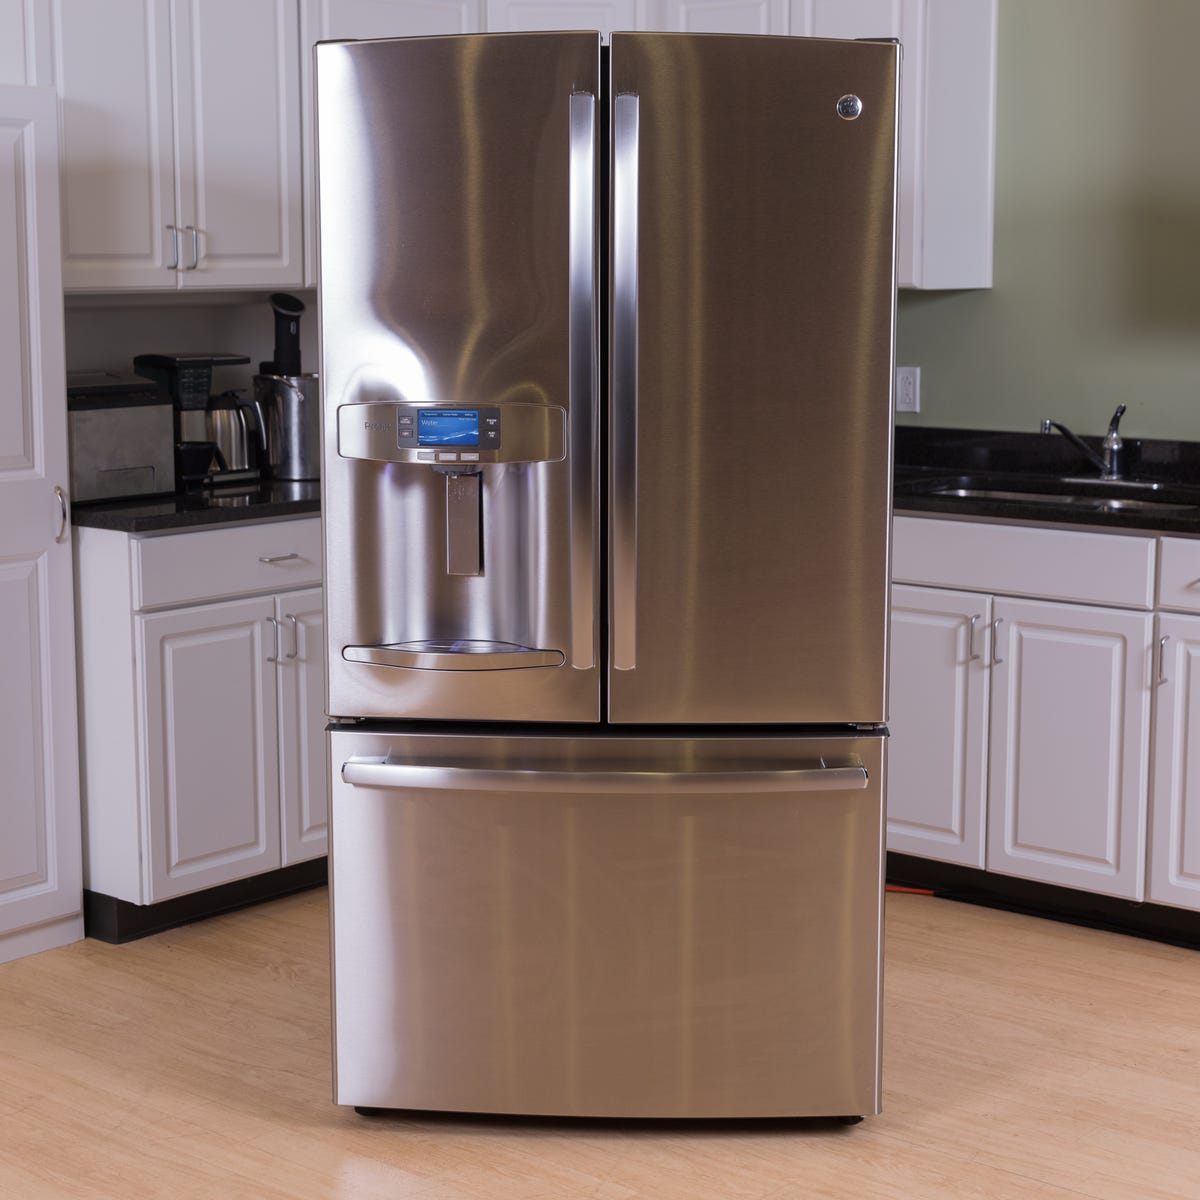 GE PFE28RSHSS review: GE filled its Profile Series fridge with premium  features - CNET